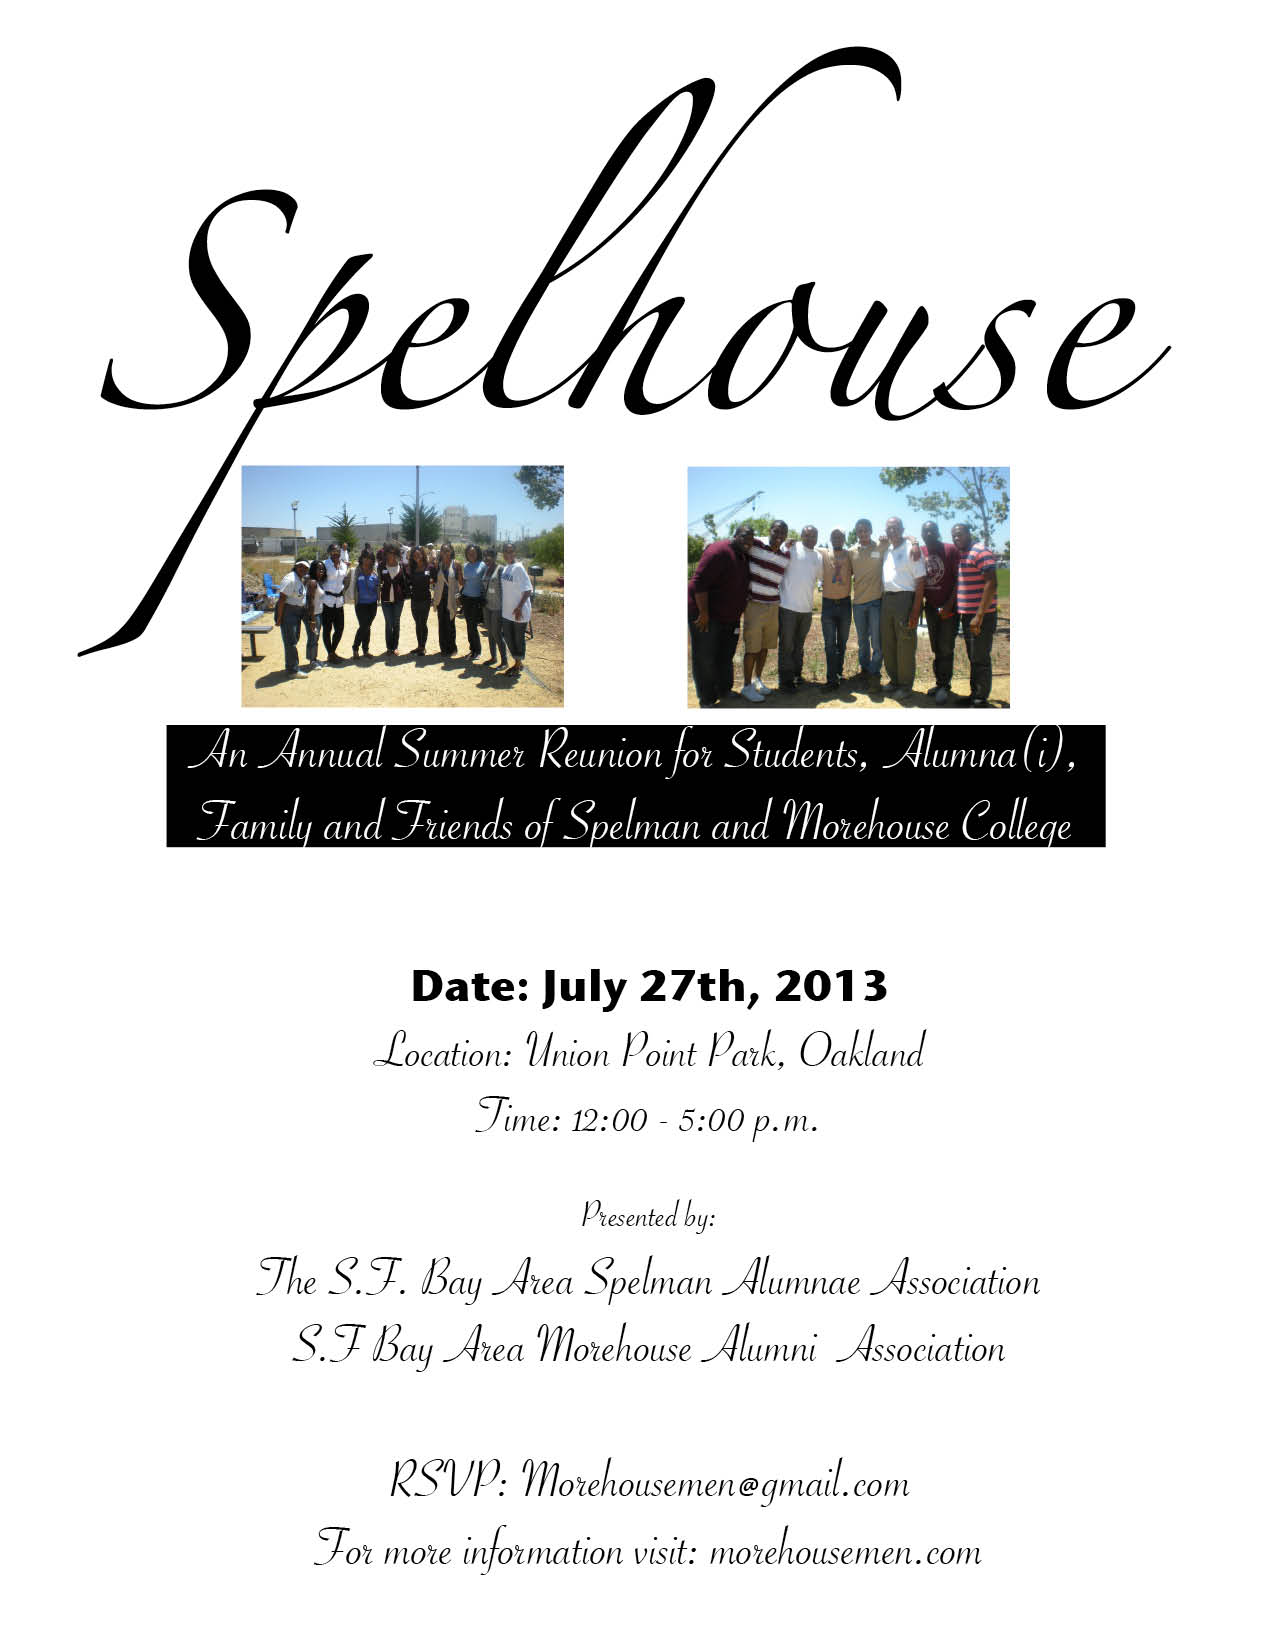 SpelHouse July 27th at Union Park in Oakland